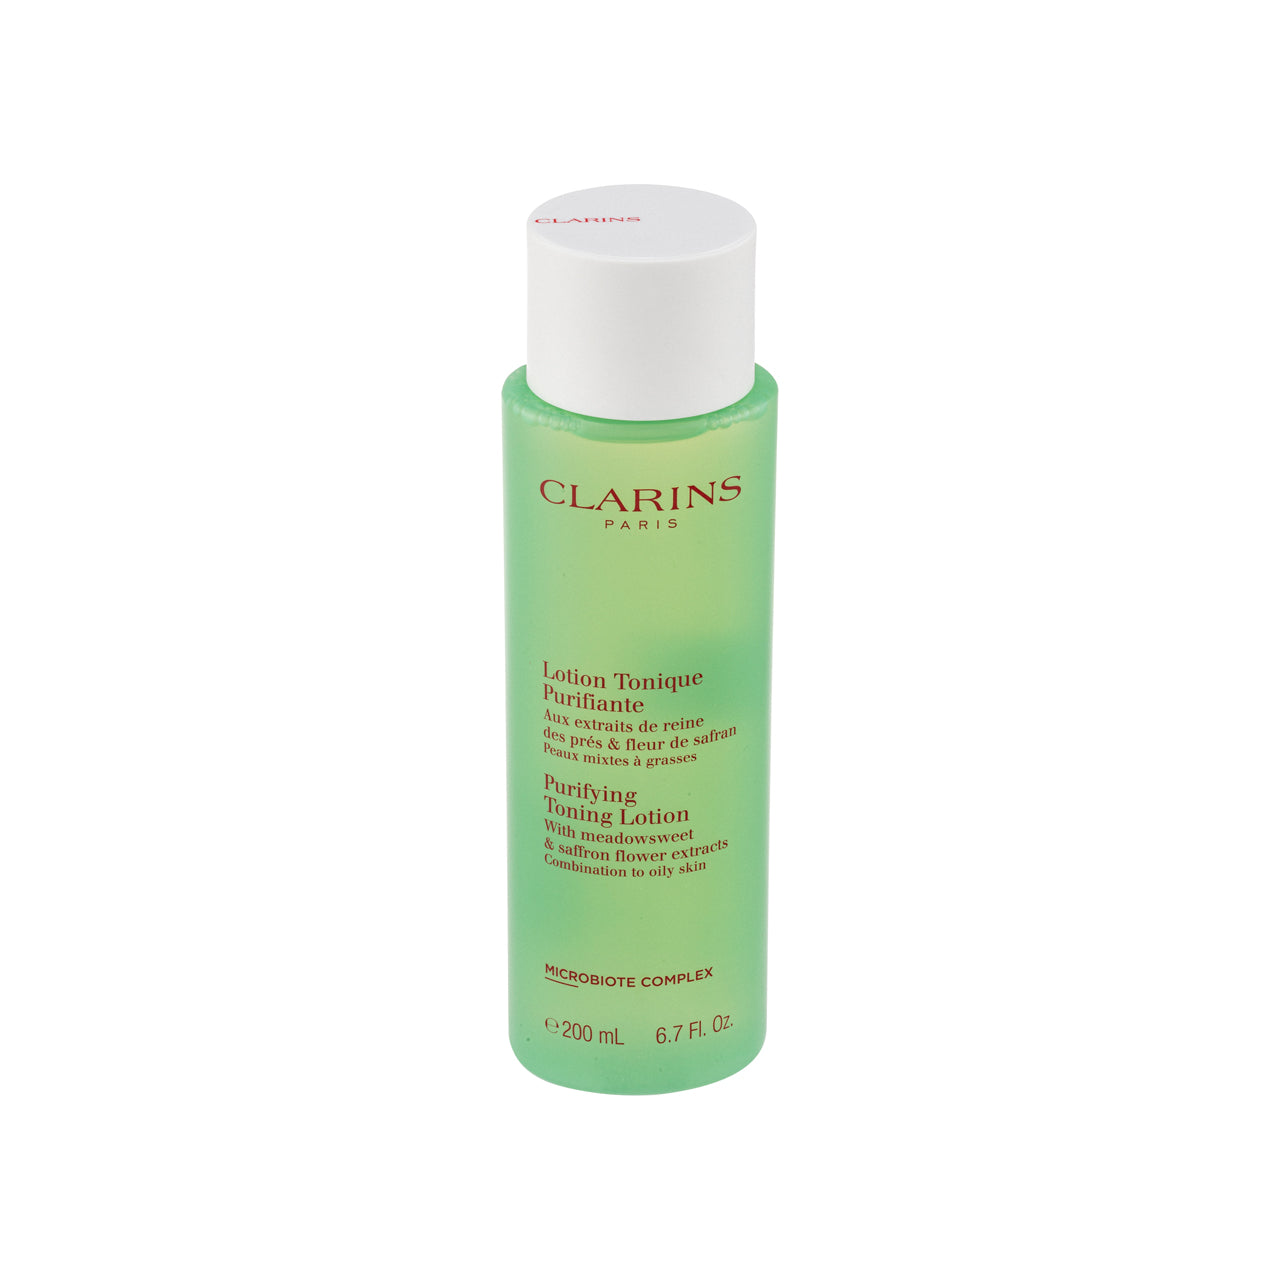 Clarins Purifying Toning Lotion  Combination To Oily Skin 200ml